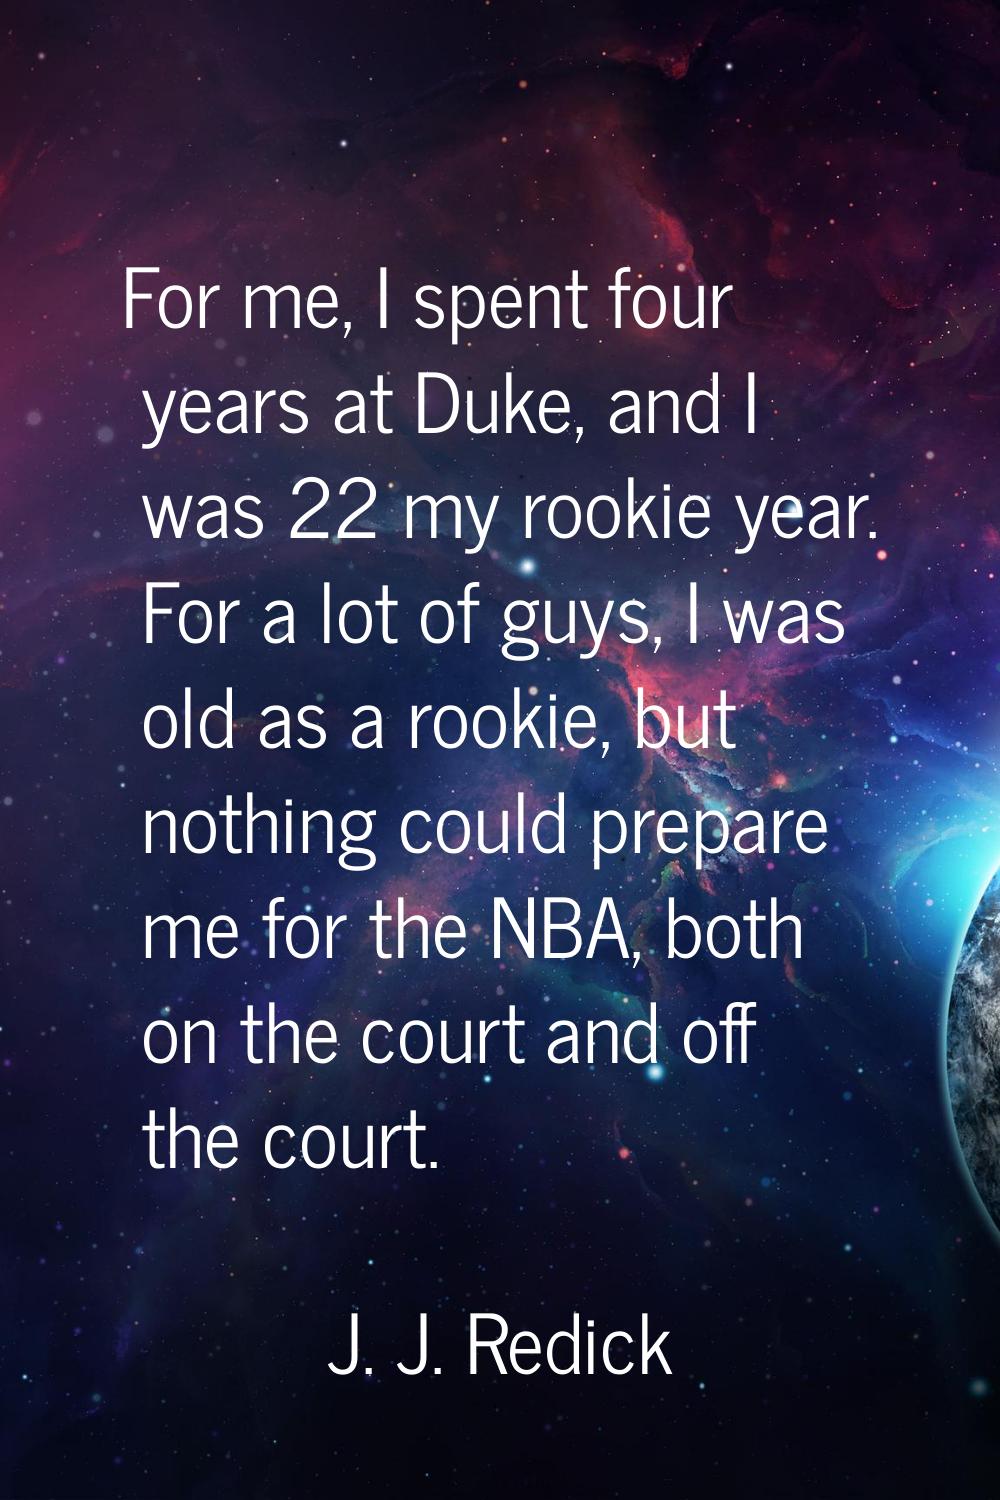 For me, I spent four years at Duke, and I was 22 my rookie year. For a lot of guys, I was old as a 